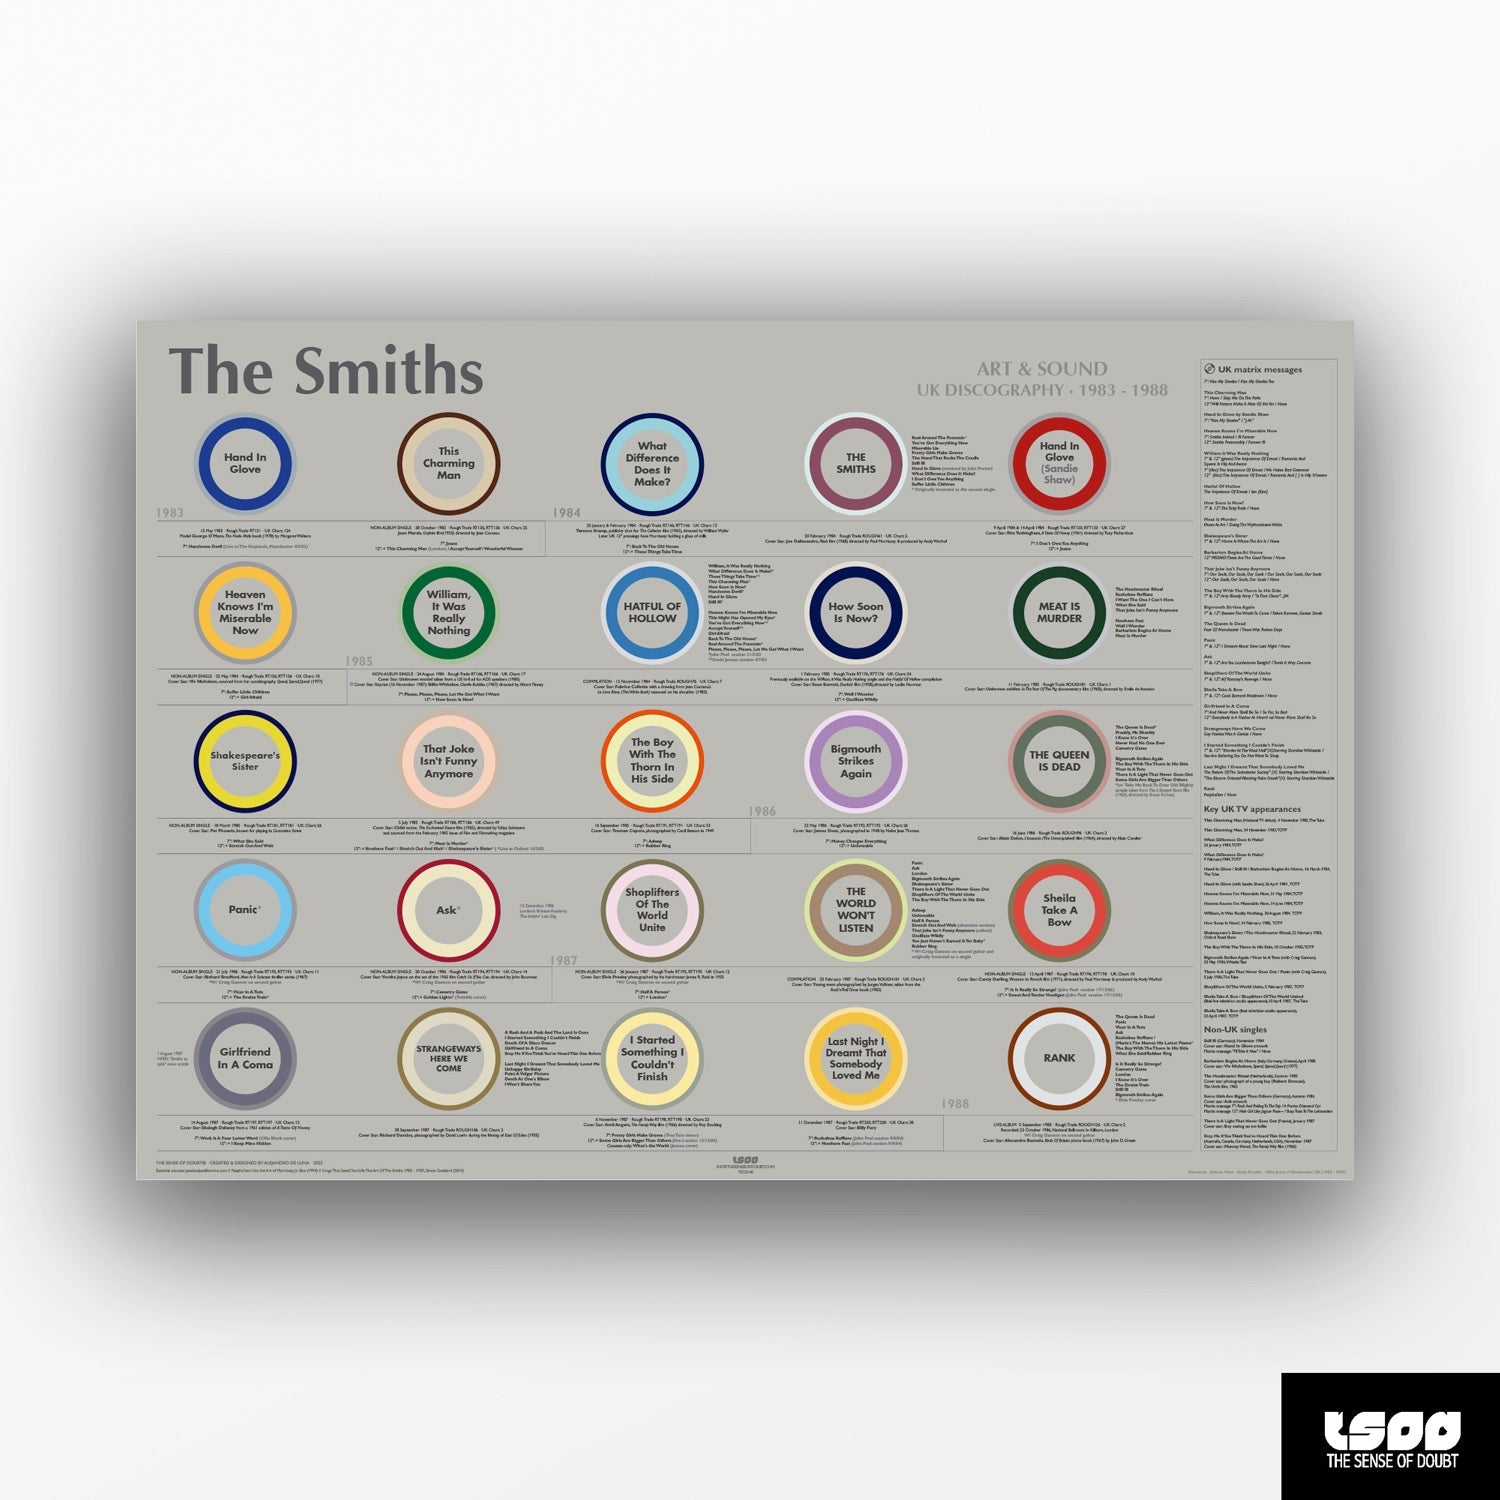 The Smiths - UK Discography (1983 - 1988) - The Sense of Doubt